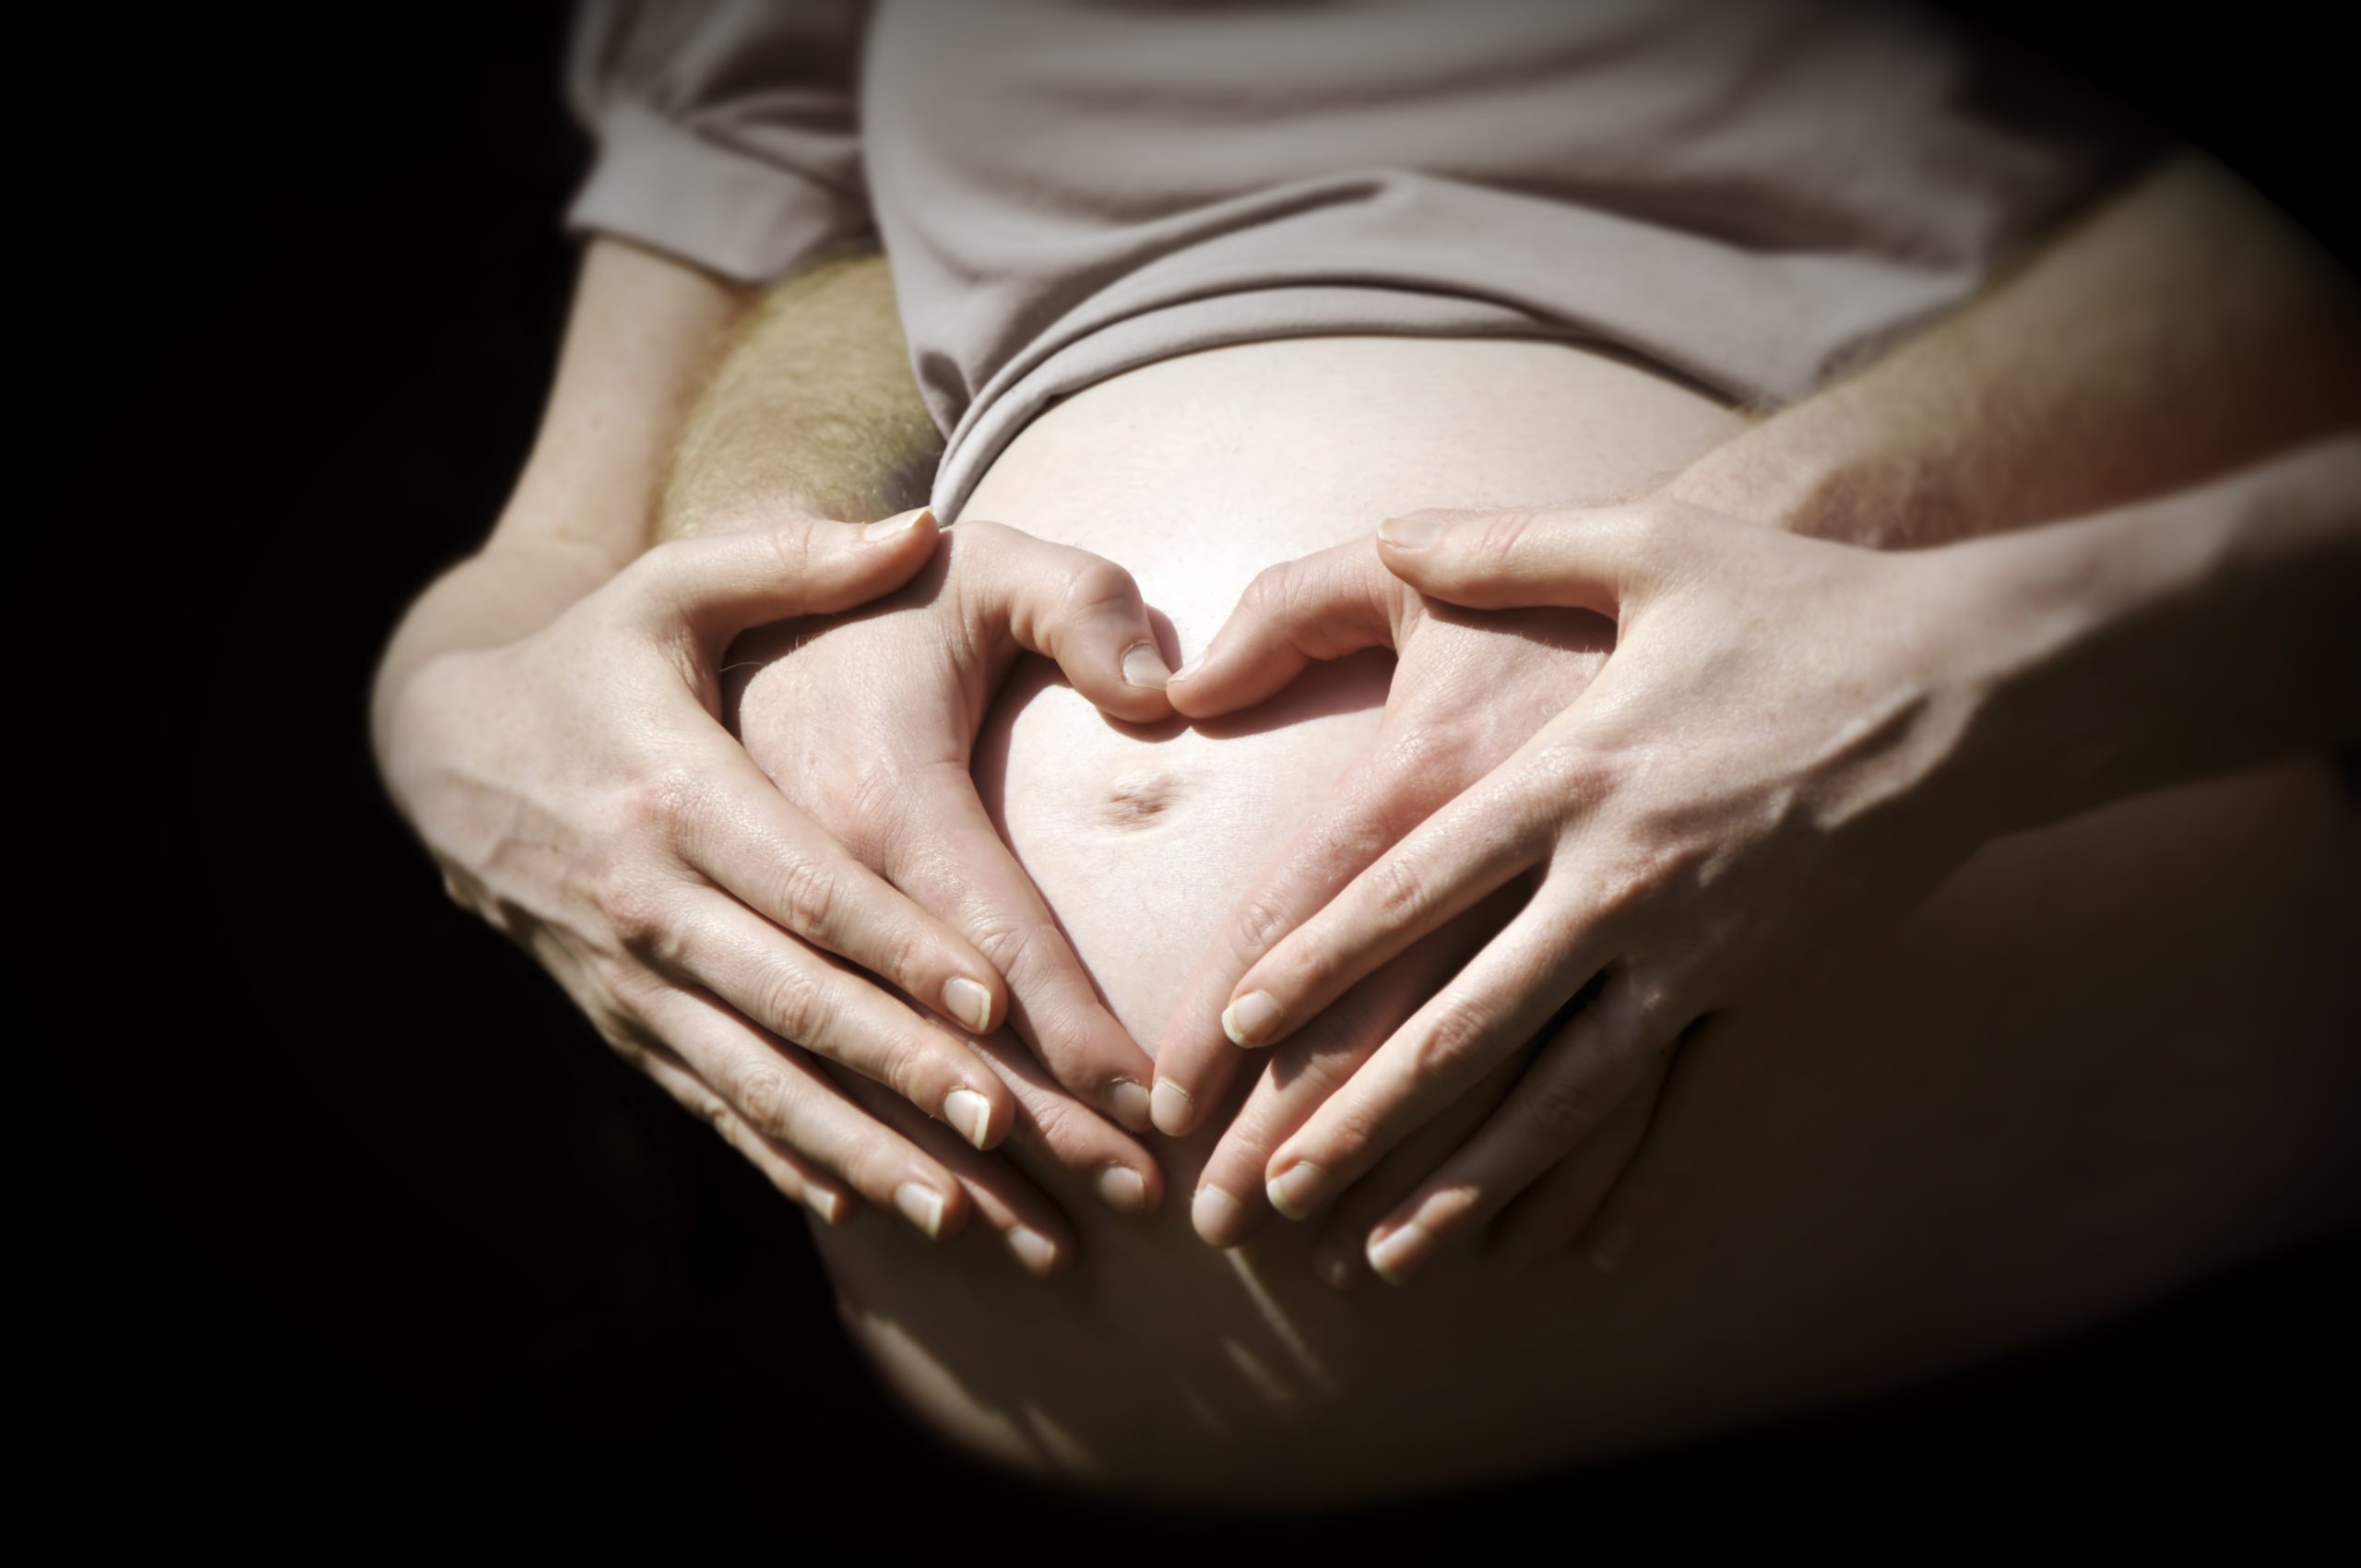 Preparing For The Big Moment: 5 Things To Anticipate In The Delivery Room